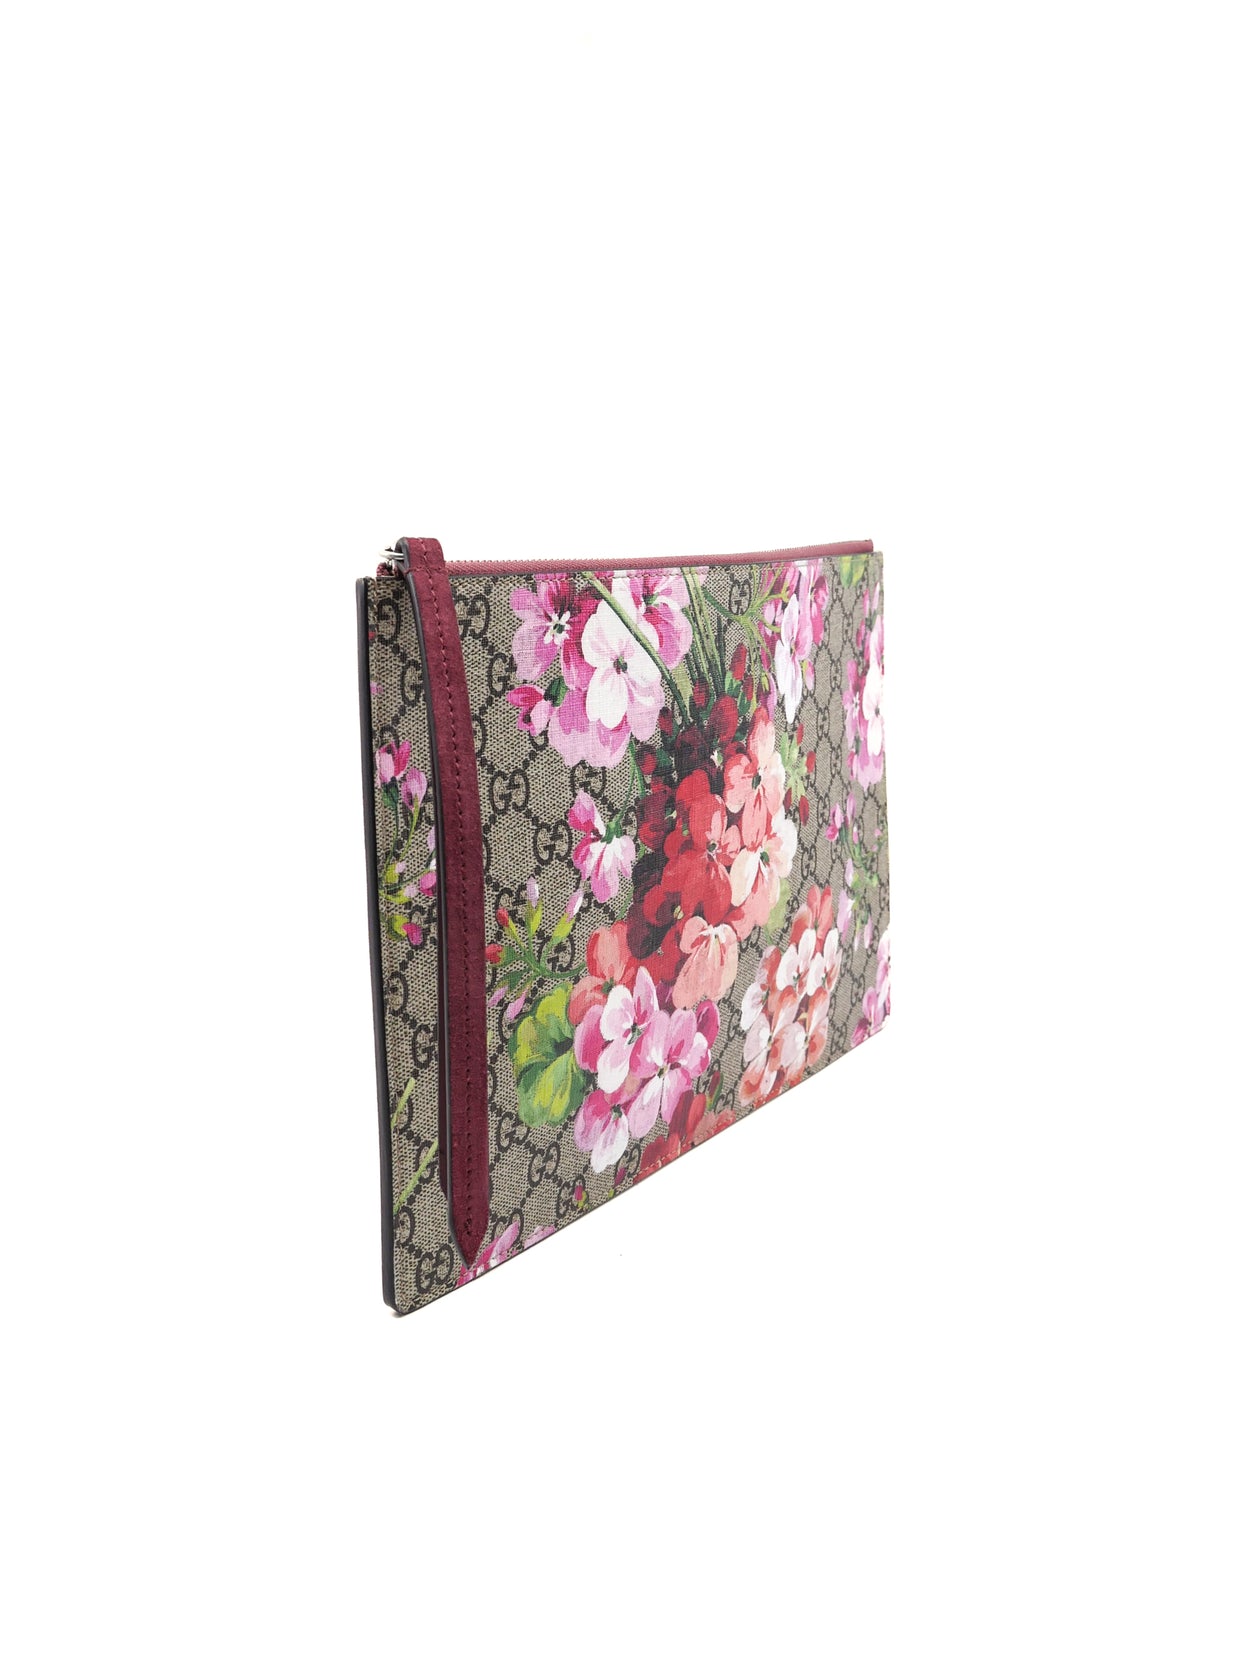 GUCCI GG Supreme Monogram Blooms Suede Large Zip Pouch Beige Multicolor Dry  Rose | FASHIONPHILE